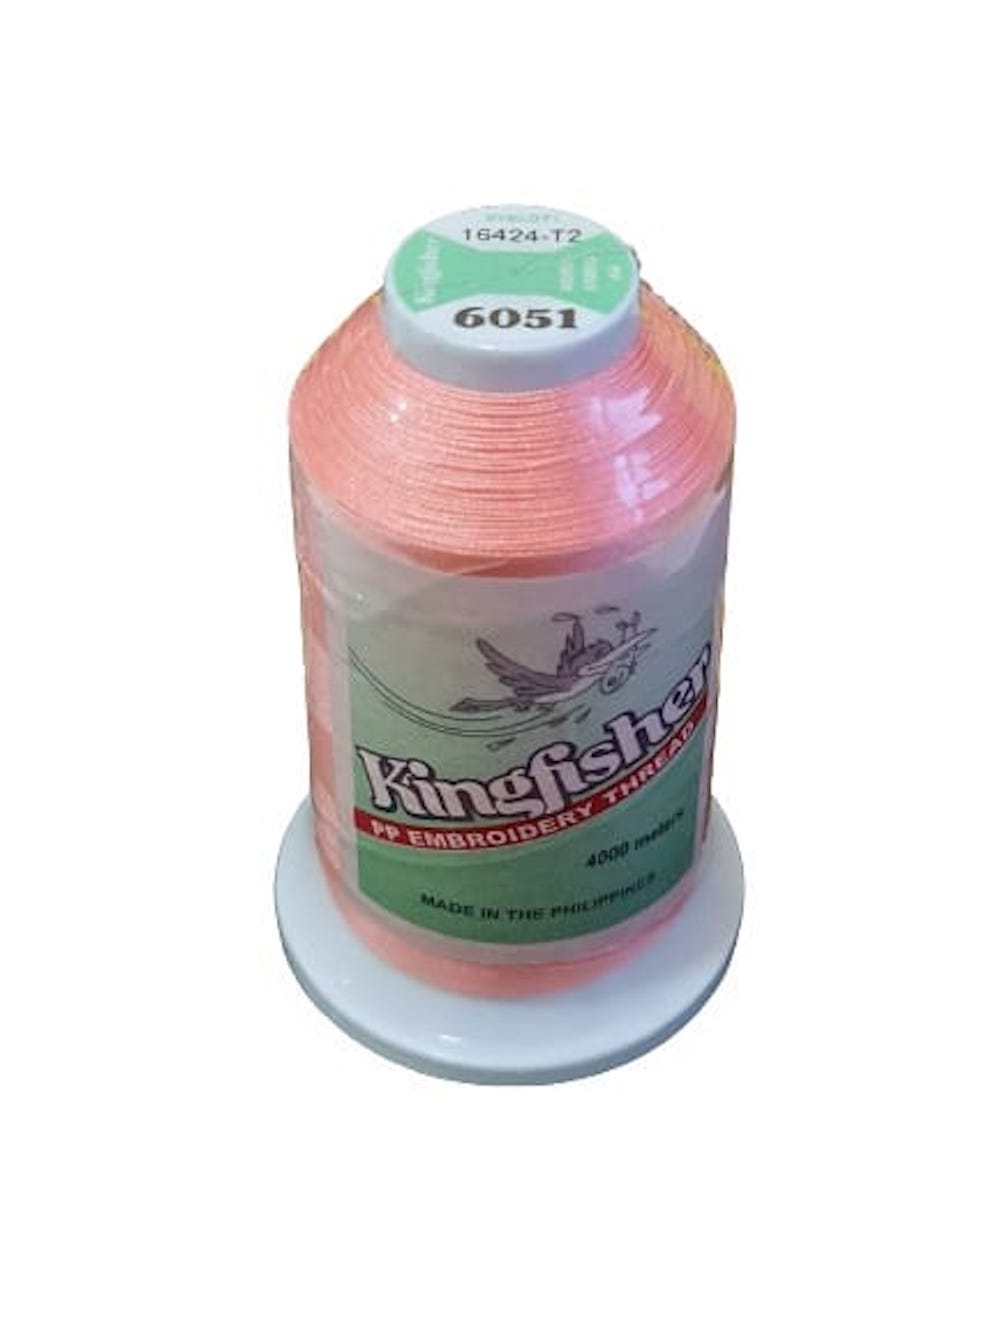 King Fisher Embroidery Thread 4000m 6051 - MY SEWING MALL